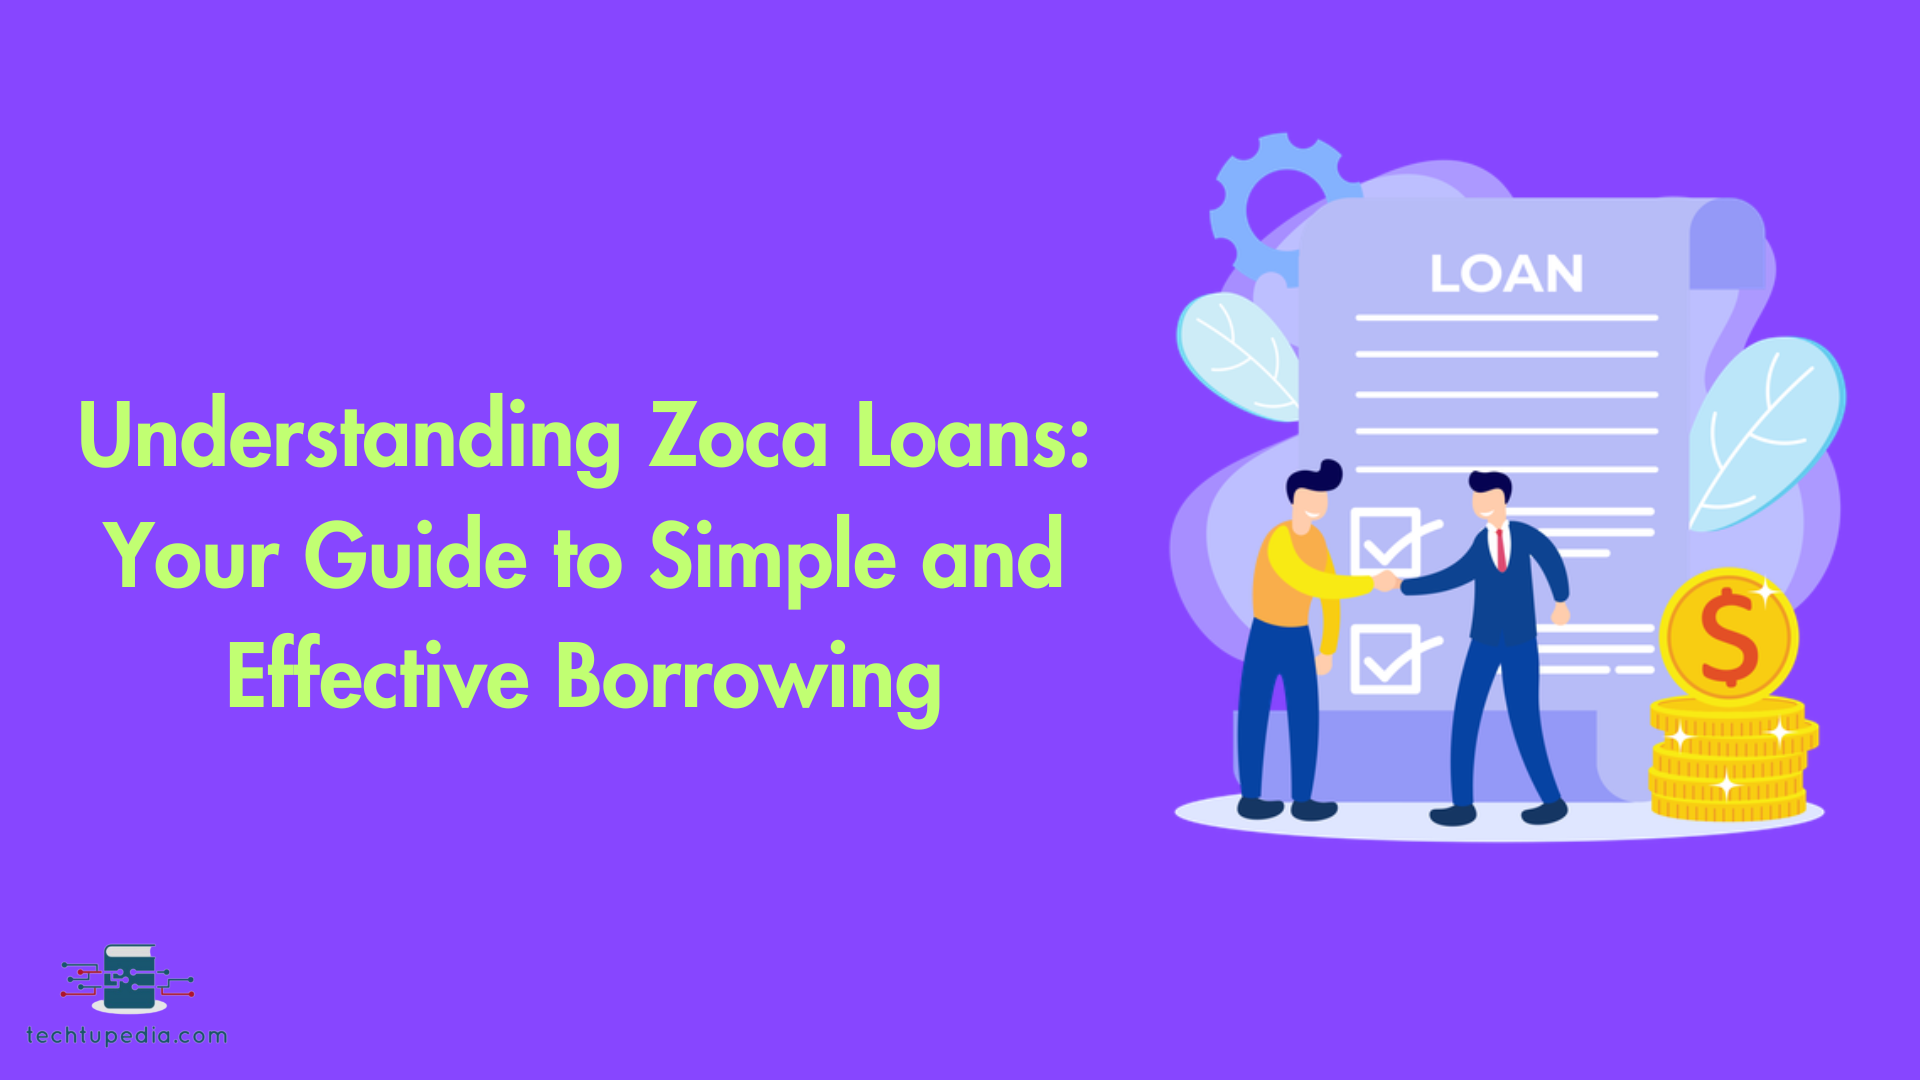 Understanding Zoca Loans: Your Guide to Simple and Effective Borrowing